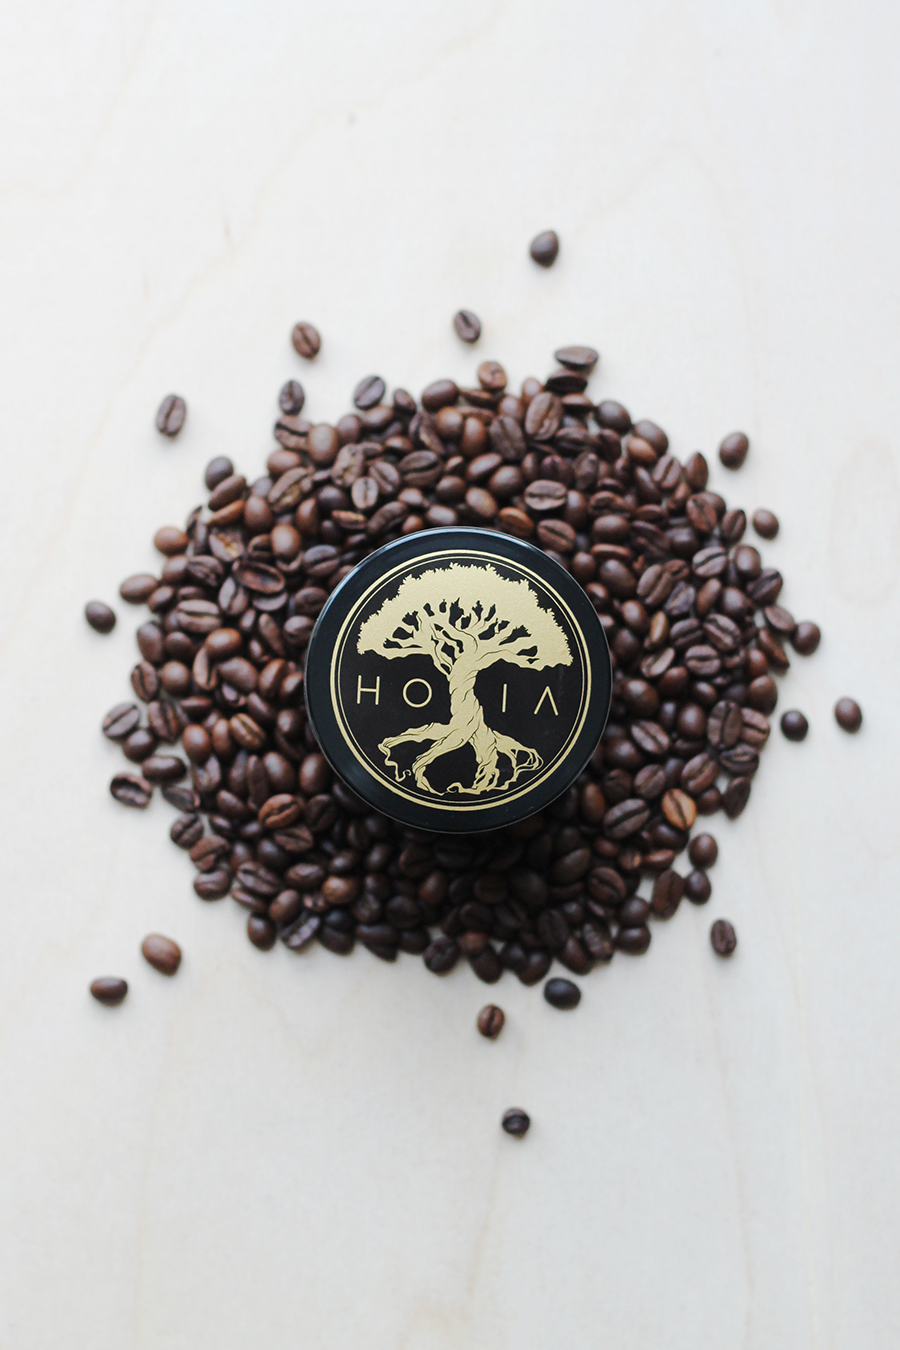 HOIA the body scrub of the coffee coin to help fight cellulite, cools, improves blood circulation, removes dead skin cells and makes the skin silky smooth.